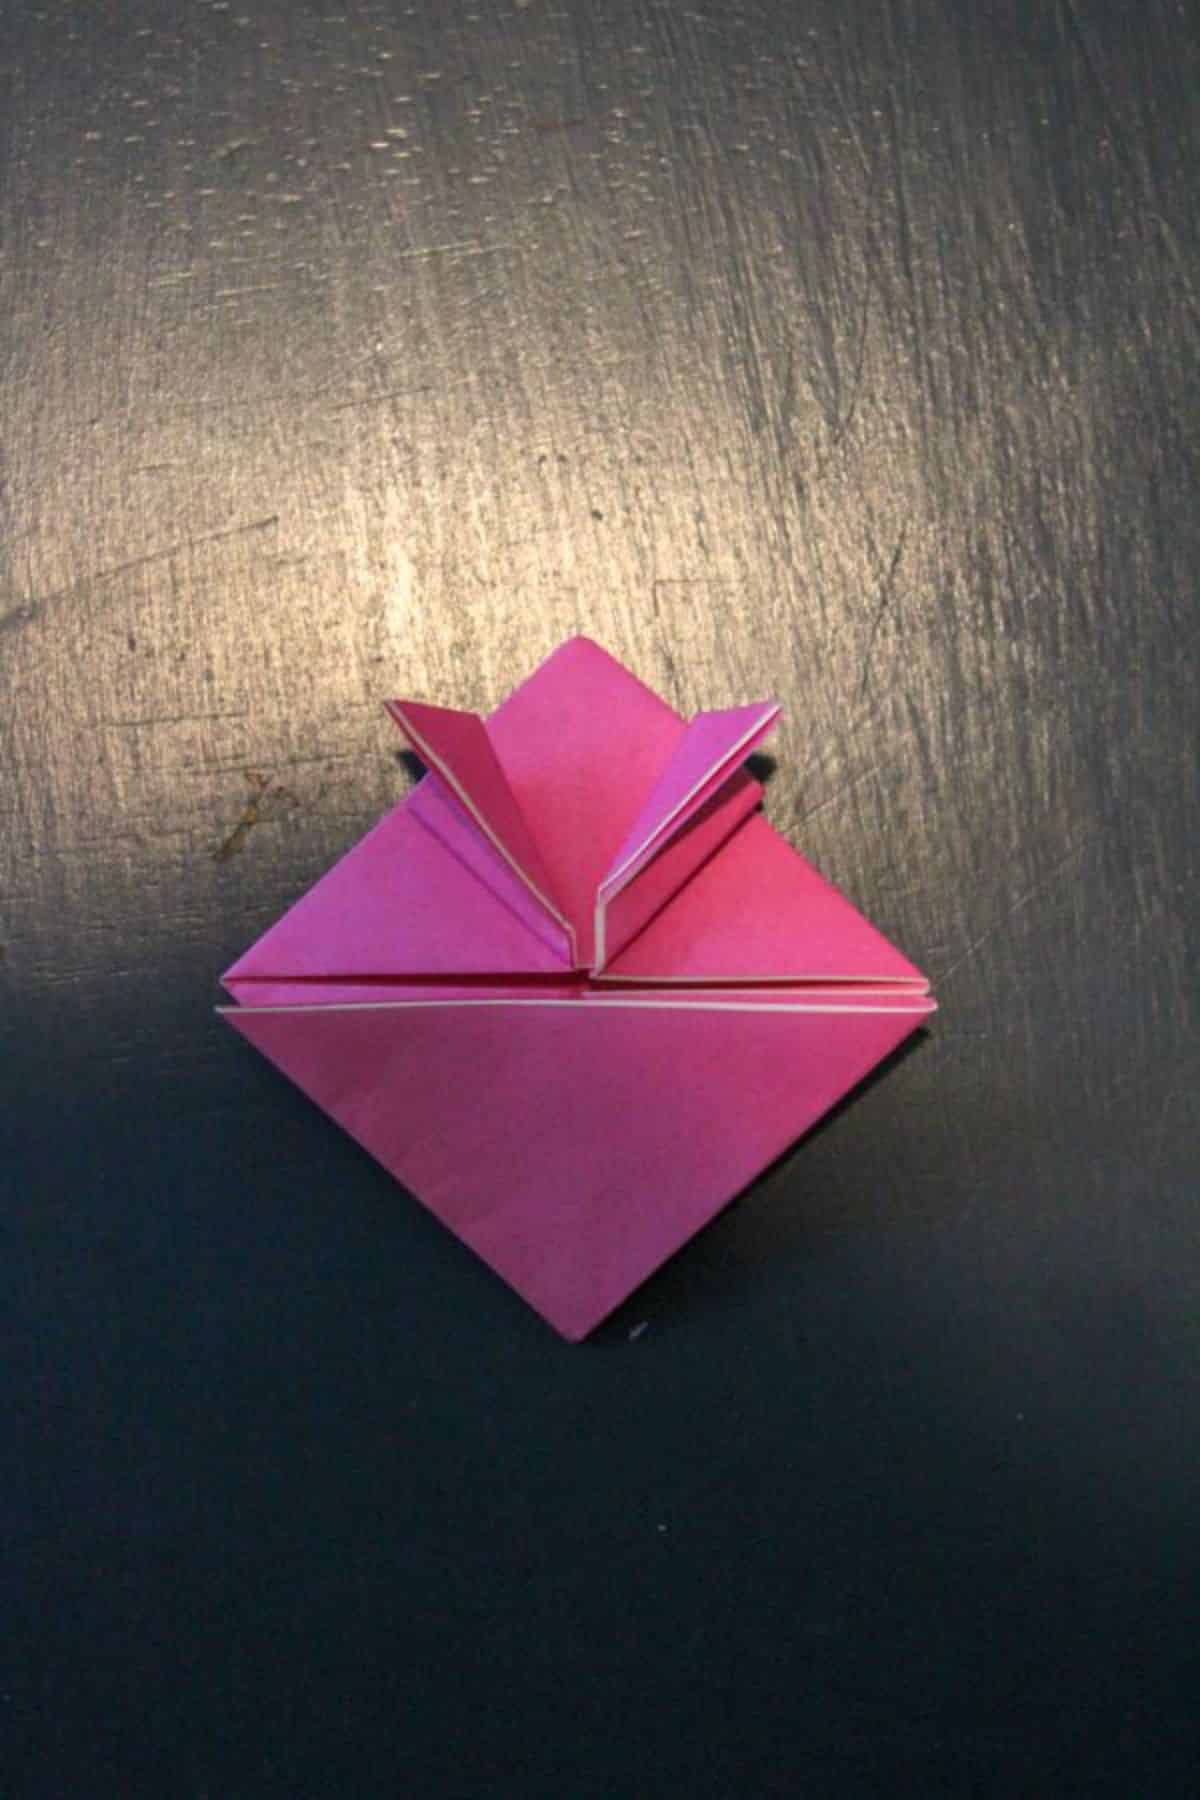 origami paper is now folded with the top part of the right side folded upwards, back down.